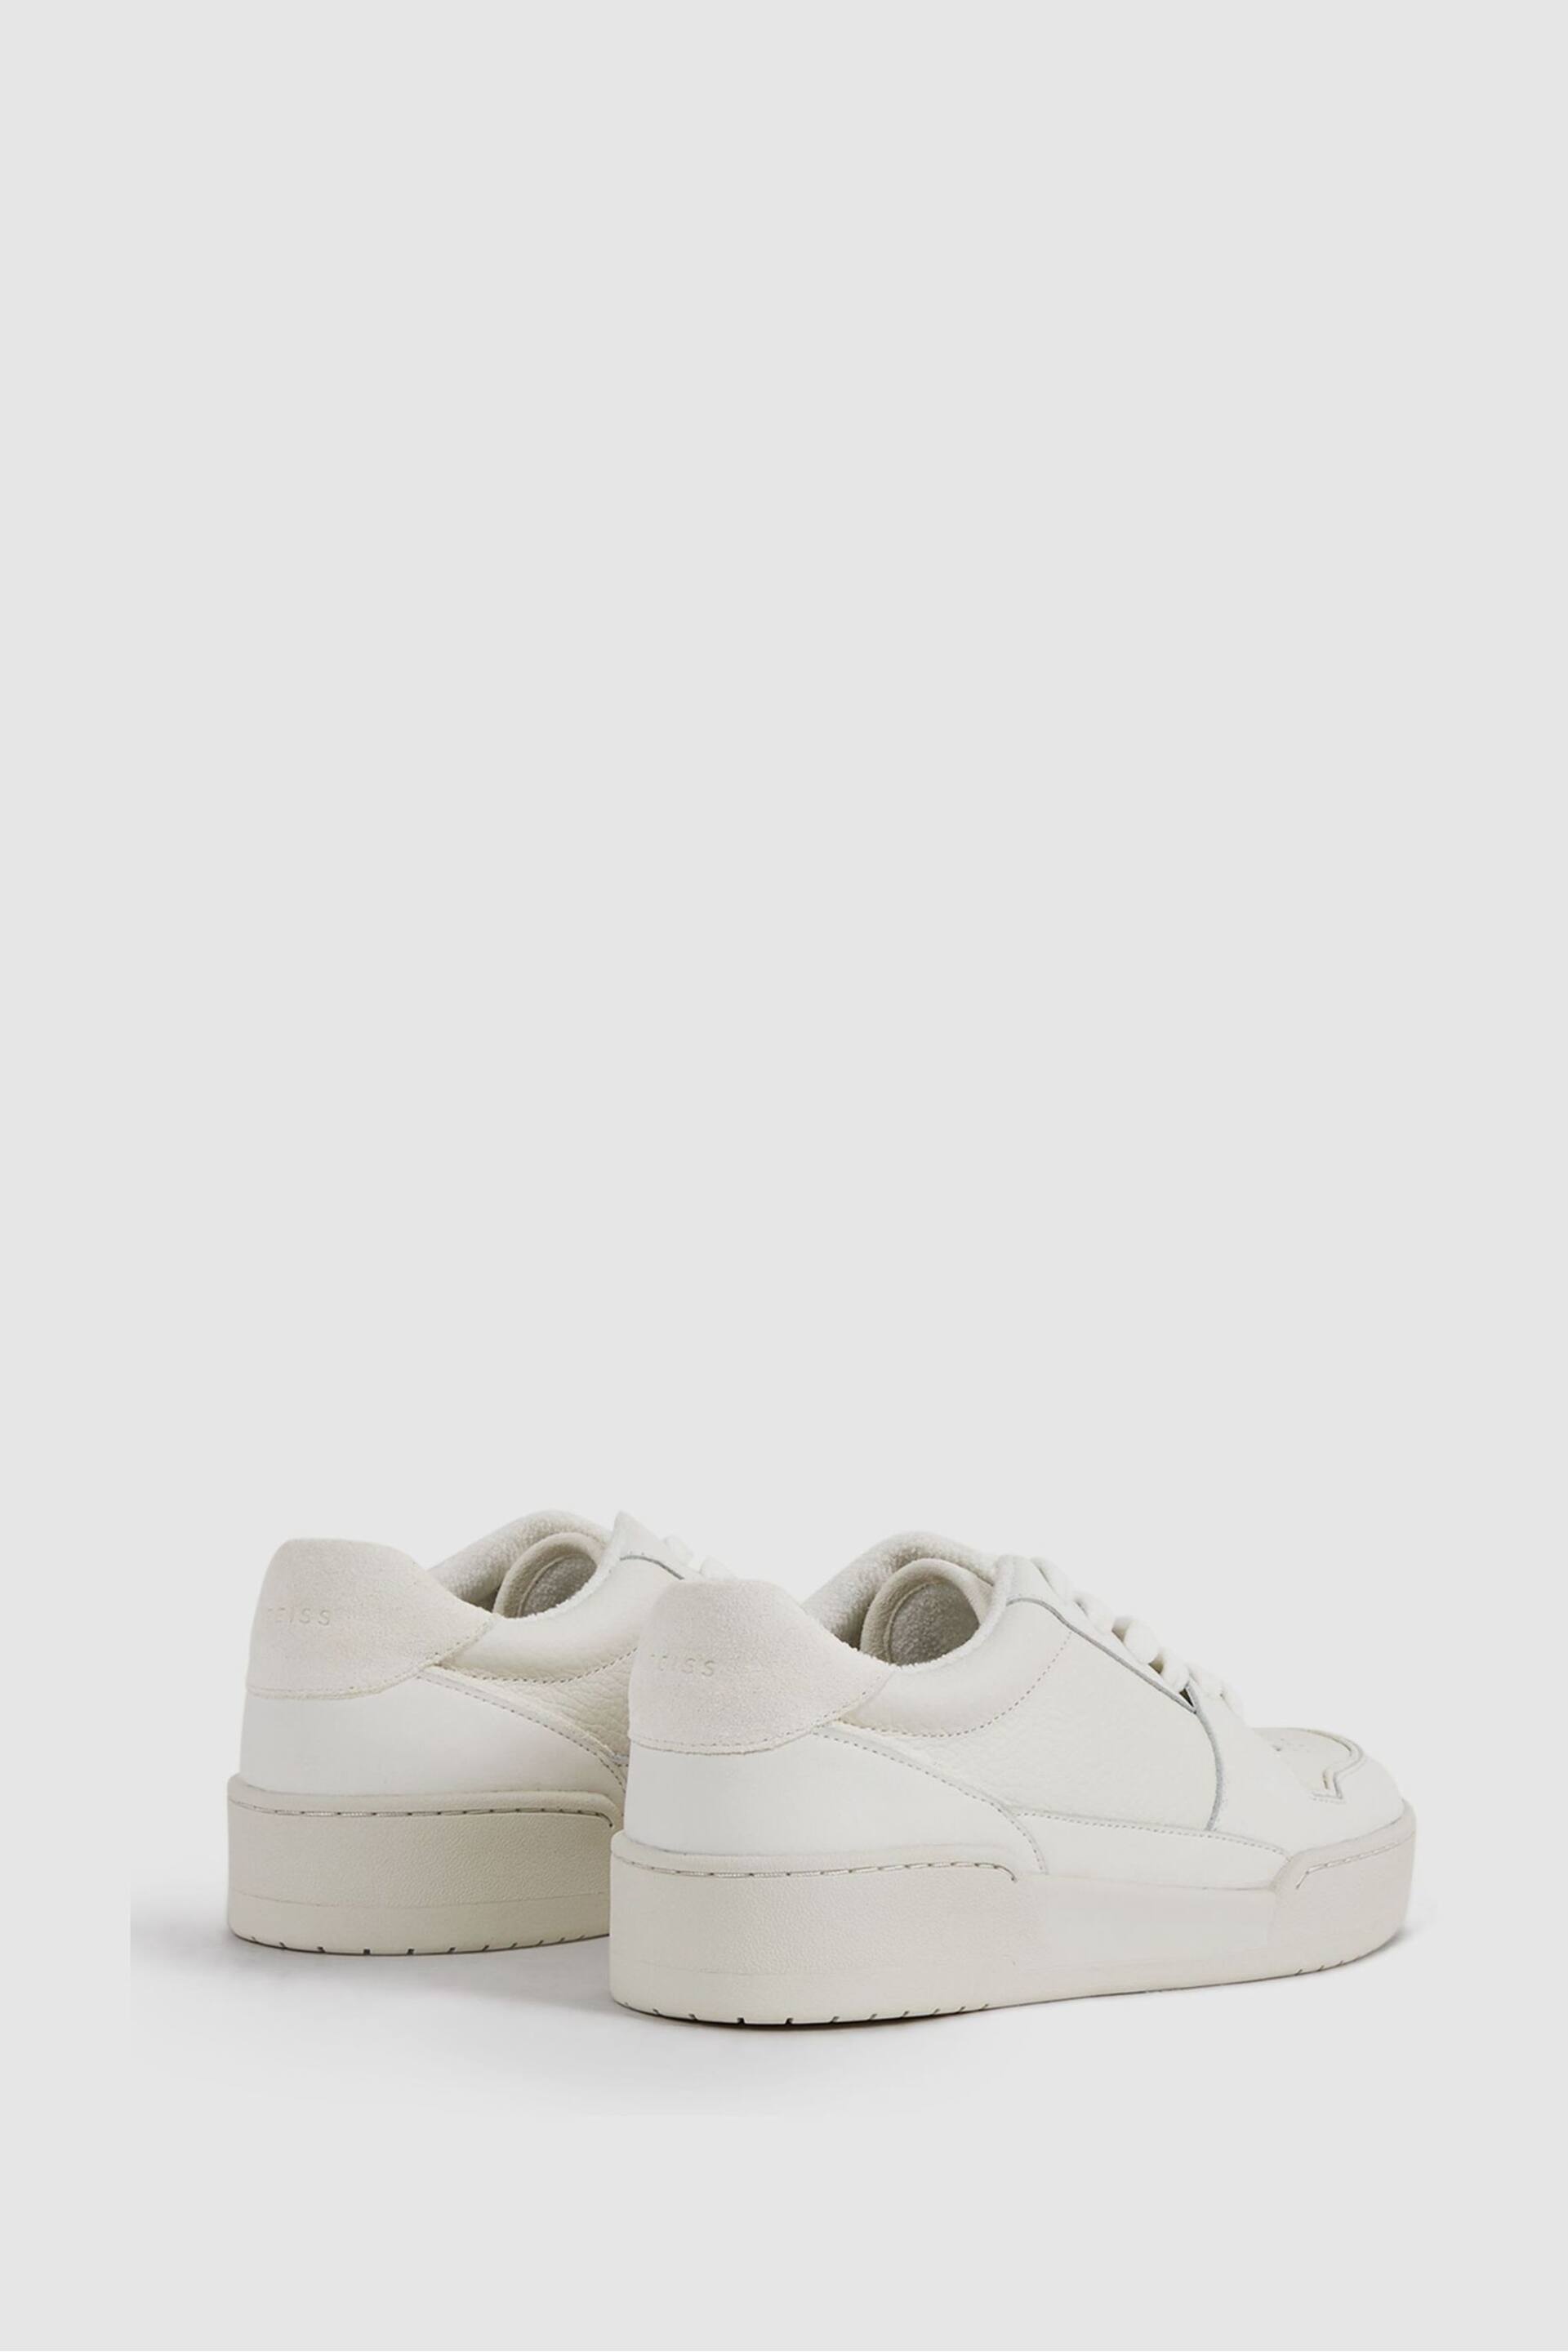 Reiss White Frankie Leather Lace-Up Trainers - Image 5 of 6